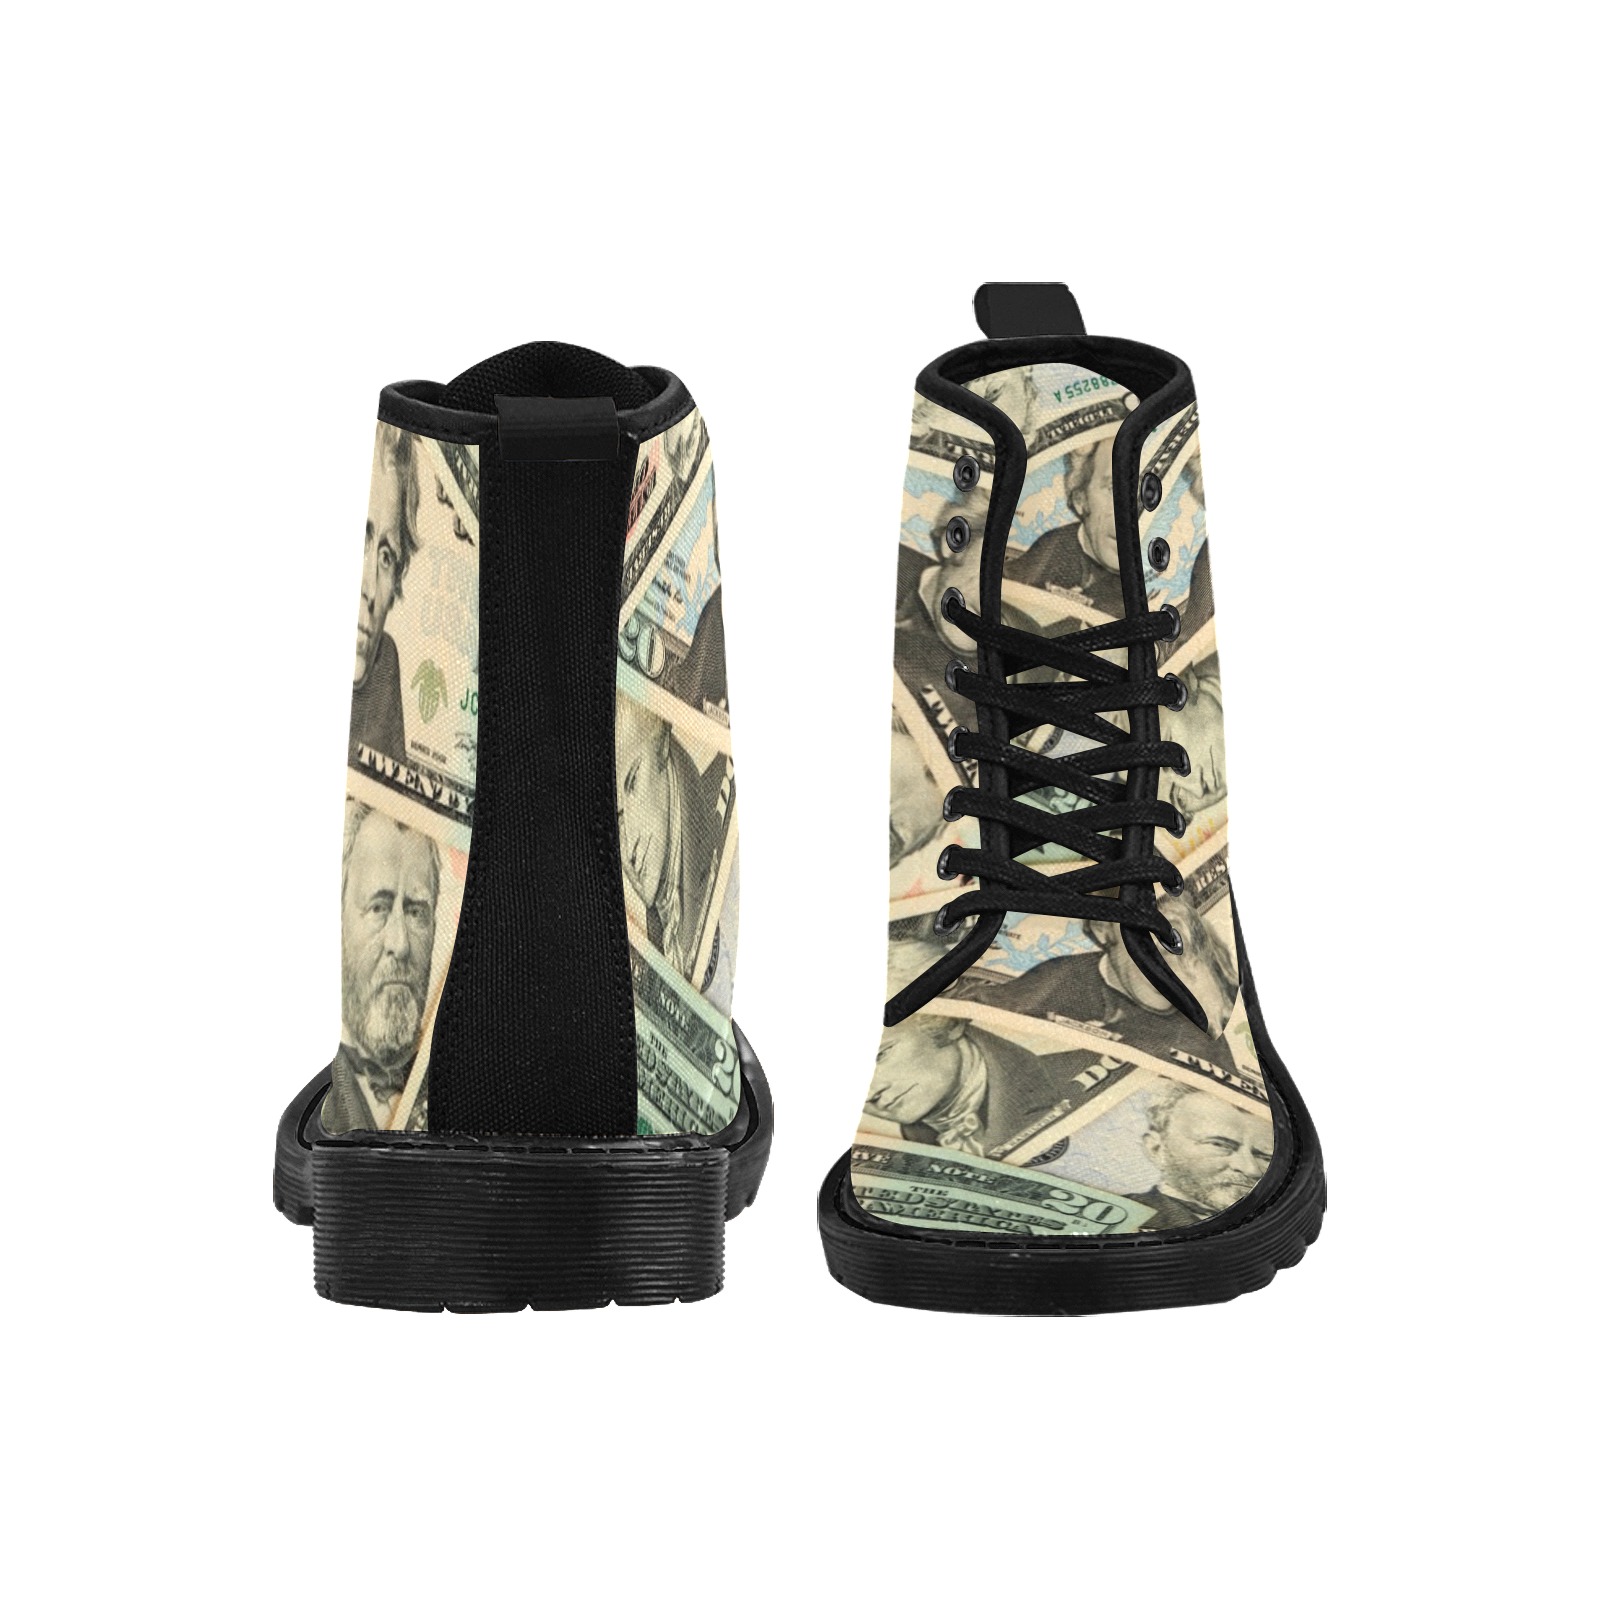 US PAPER CURRENCY Martin Boots for Women (Black) (Model 1203H)